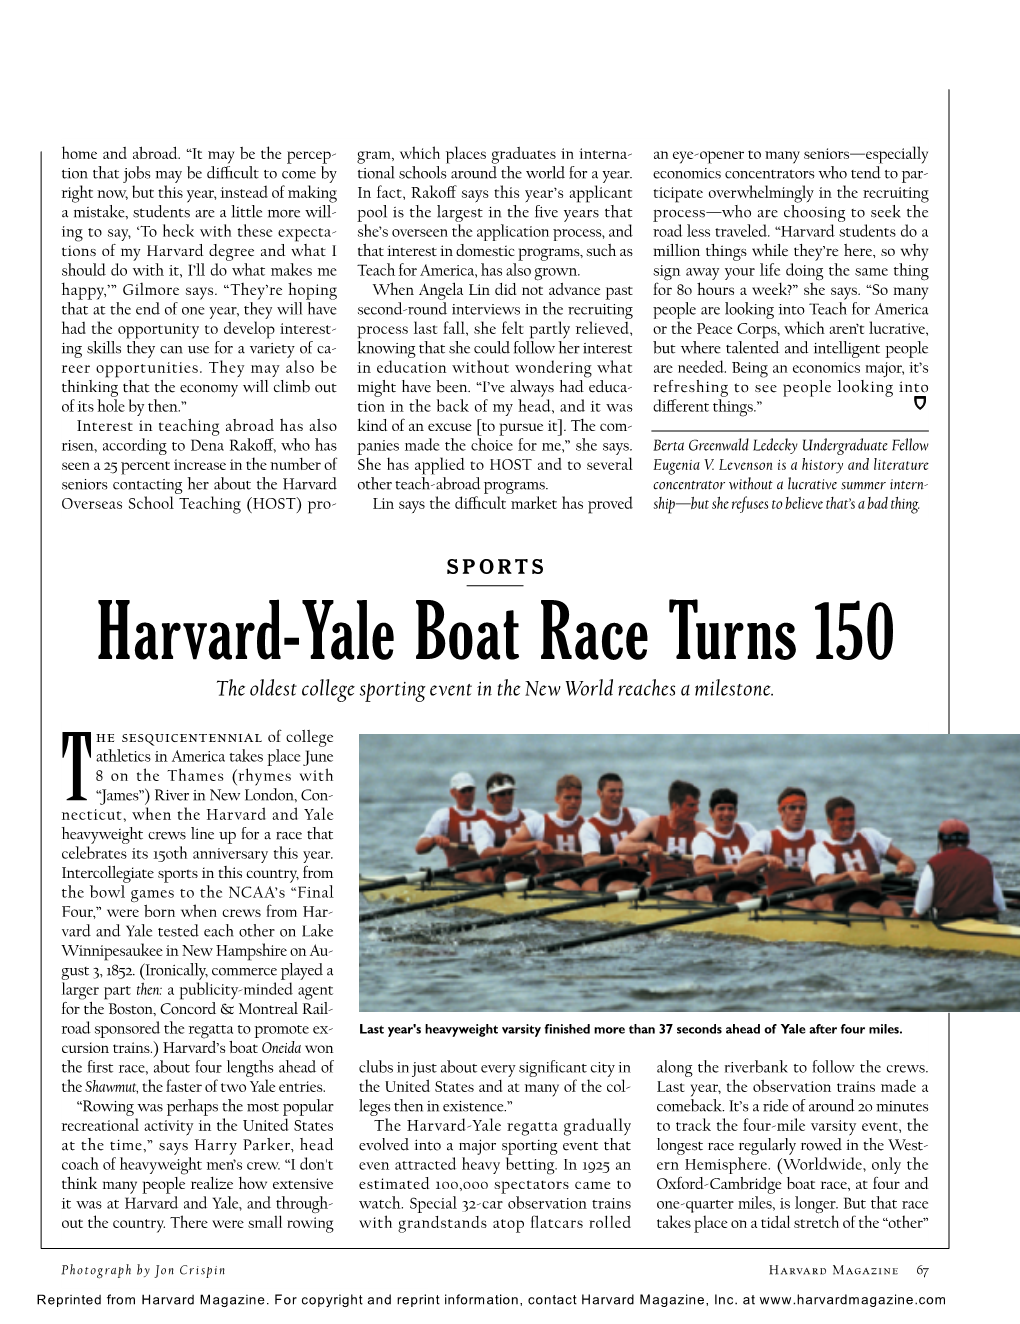 Harvard-Yale Boat Race Turns 150 the Oldest College Sporting Event in the New World Reaches a Milestone